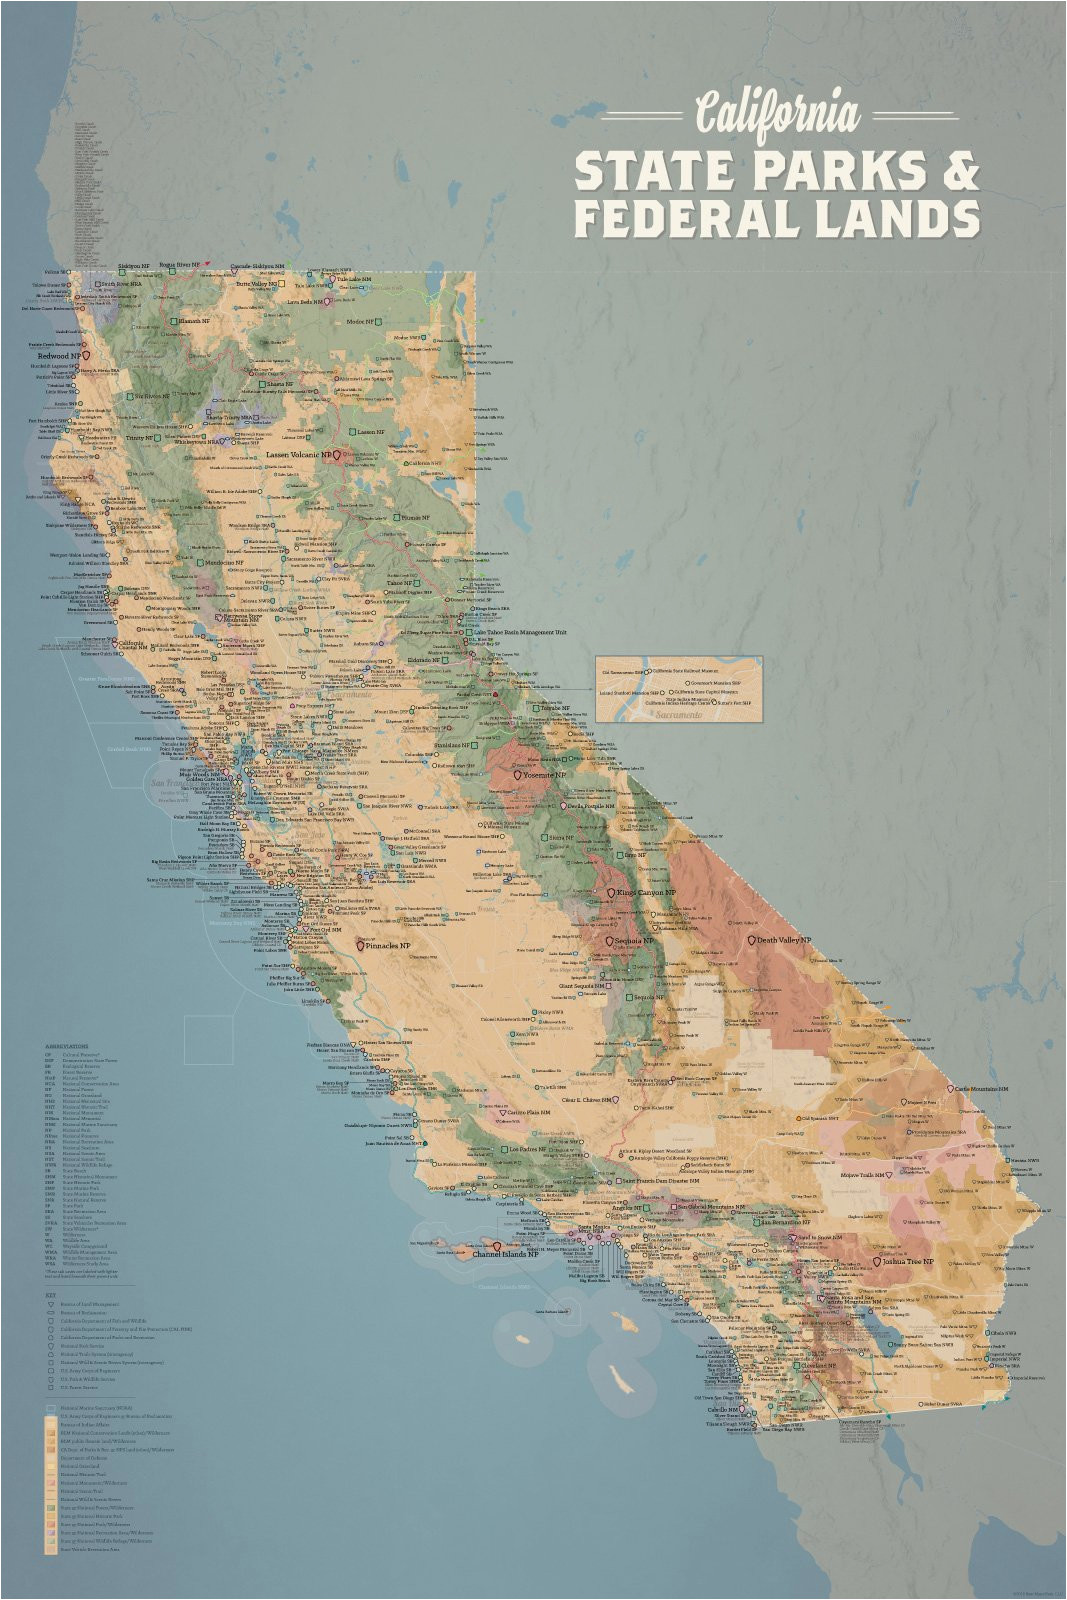 california state parks federal lands map 24x36 poster best maps ever